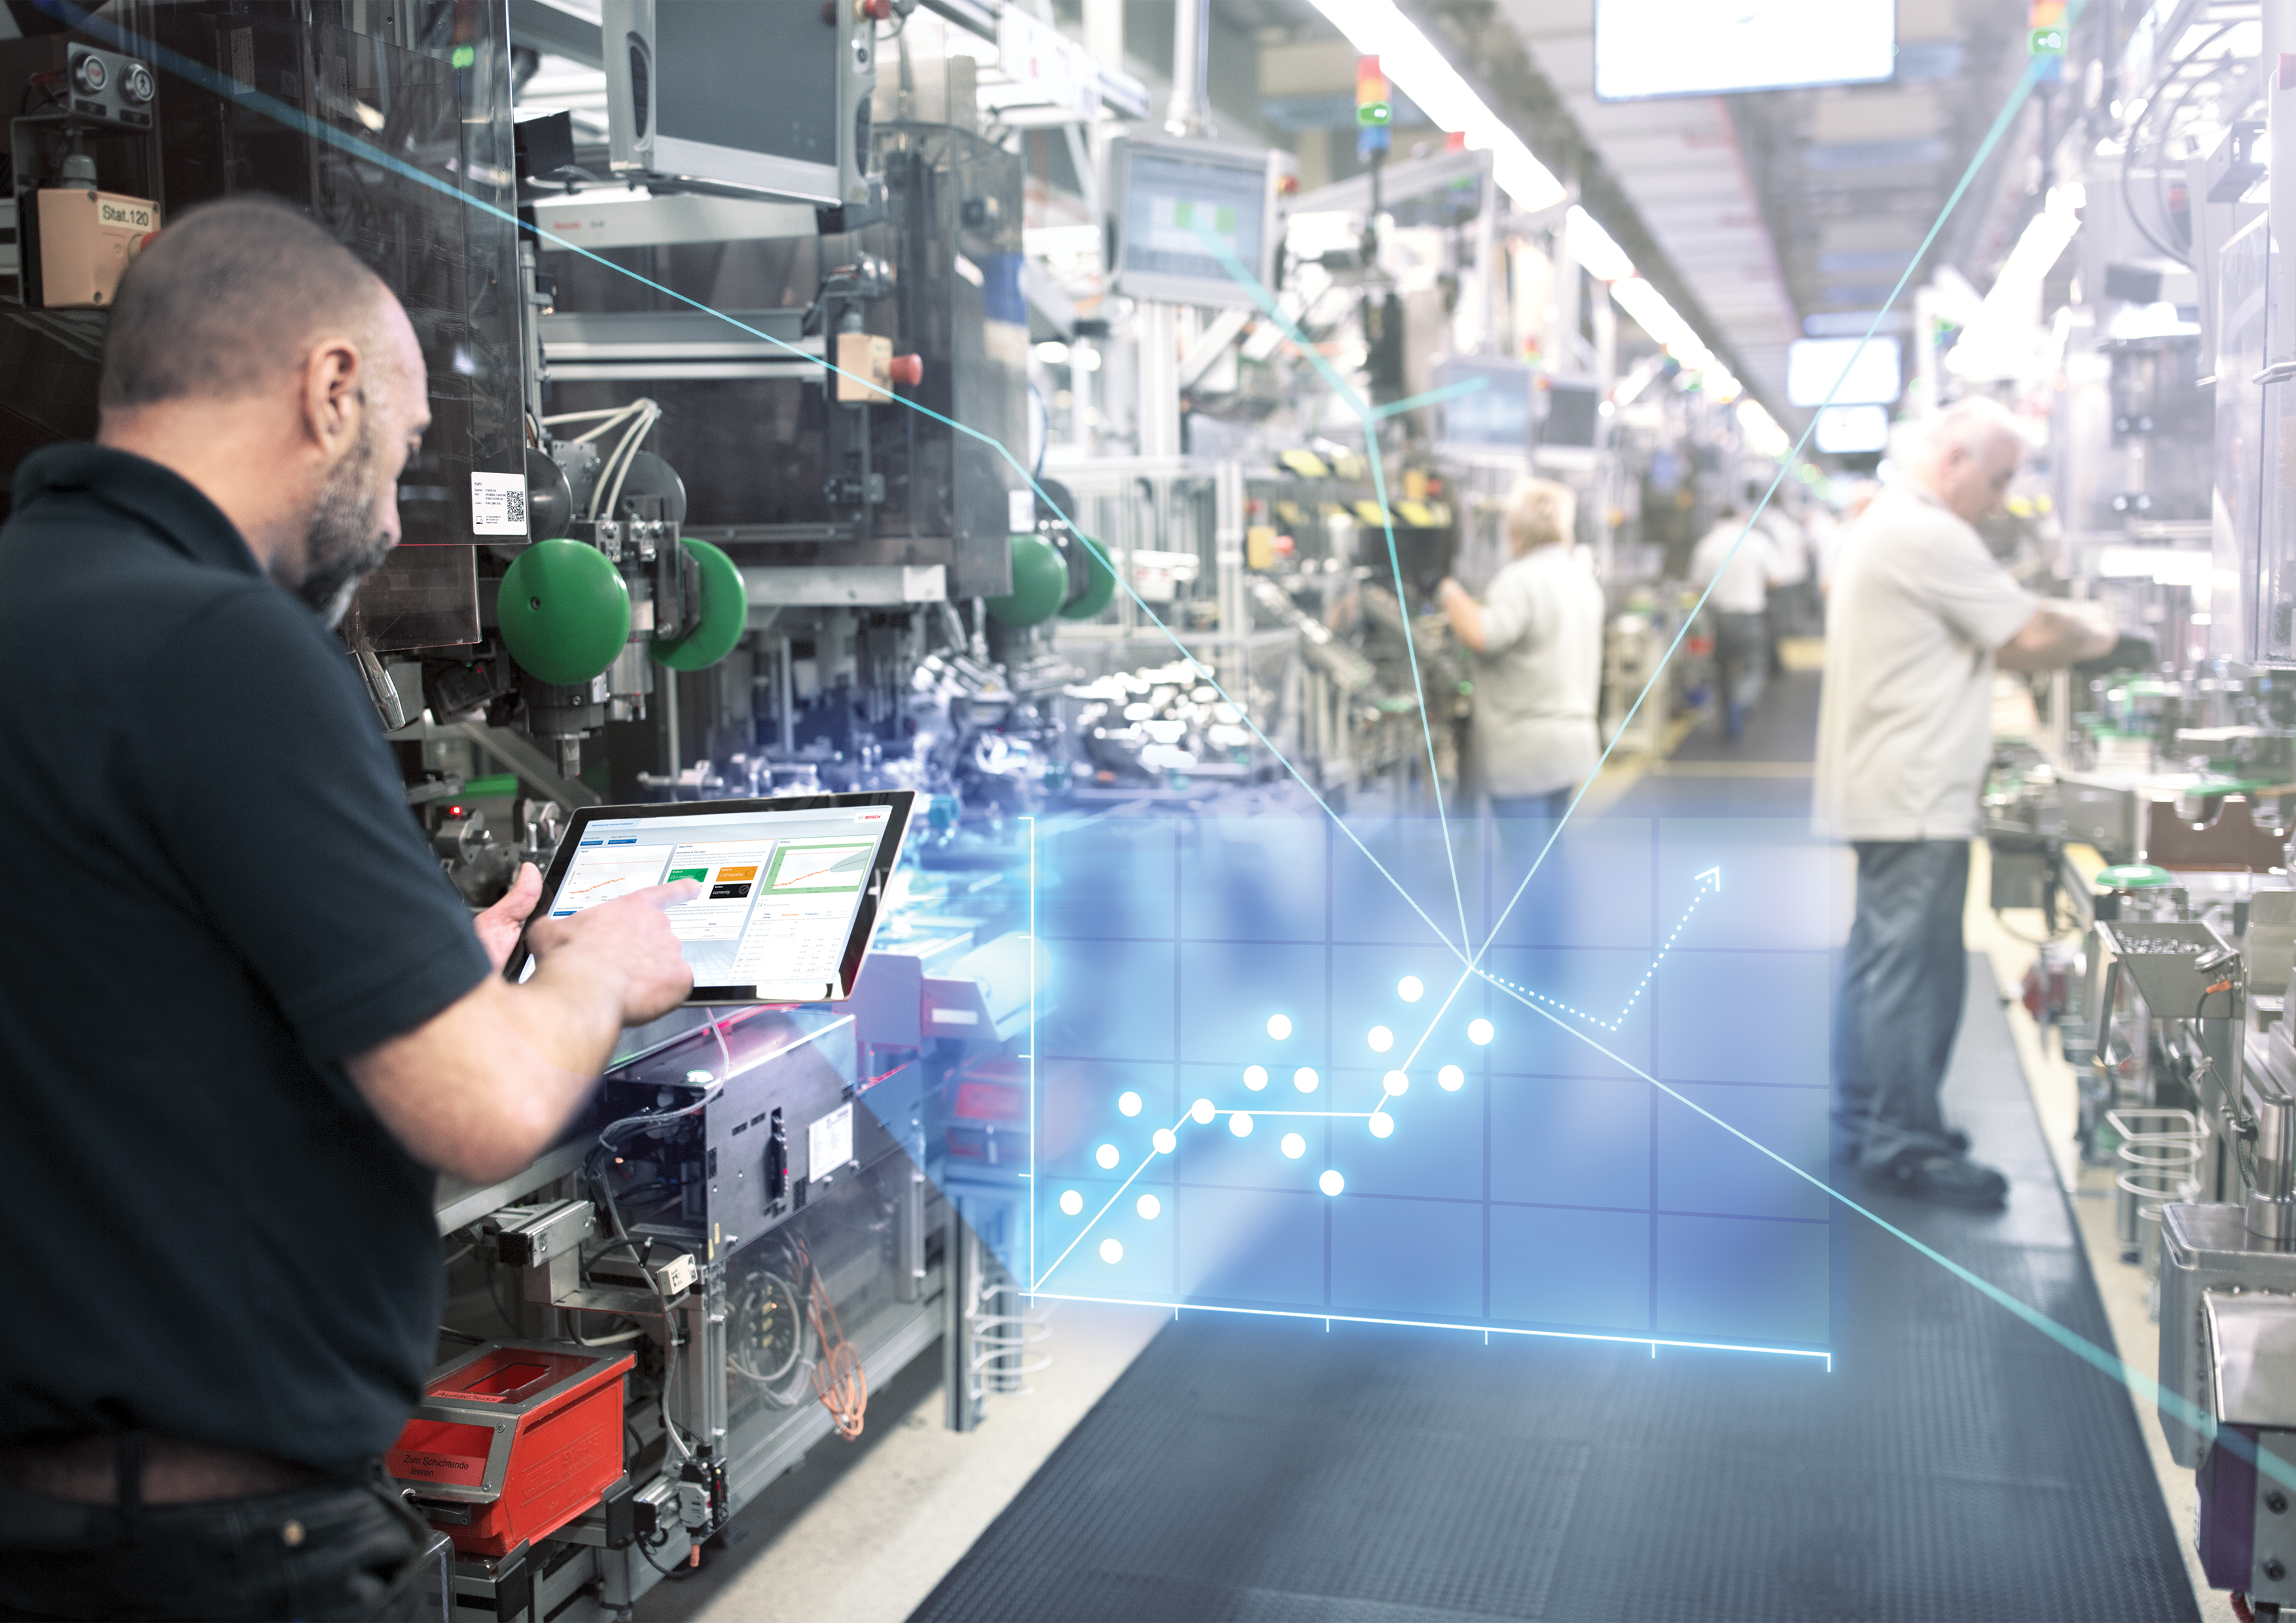 Industry 4.0 boosts competitiveness